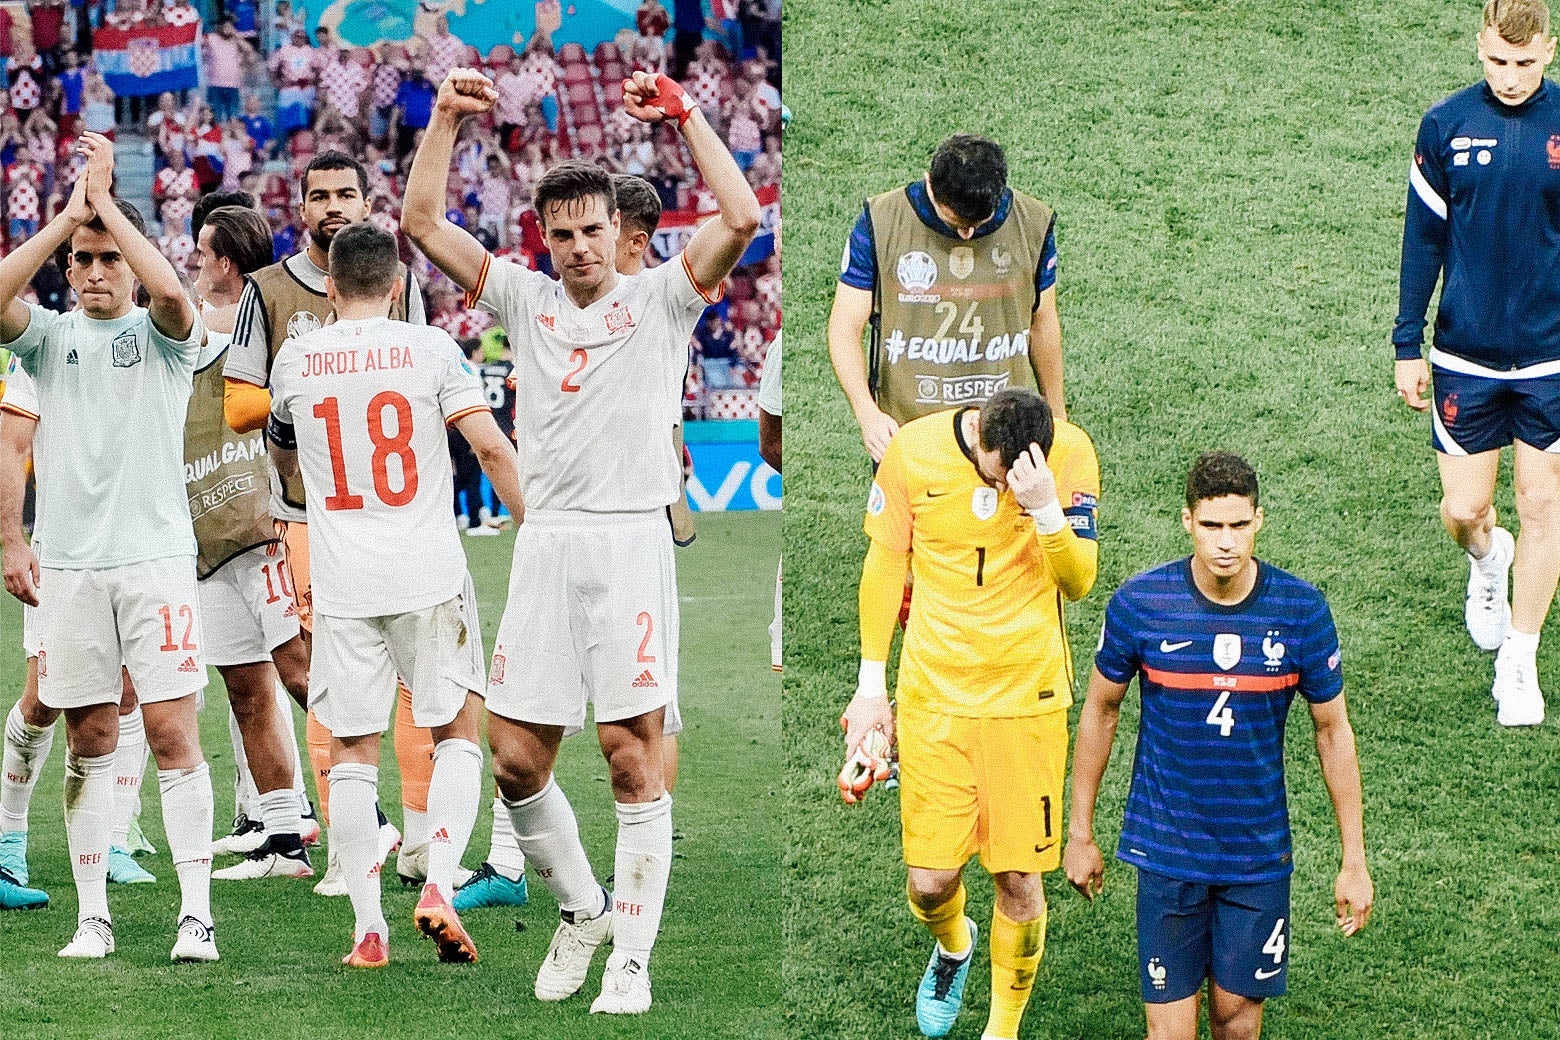 Left: Spain's players celebrate their victory with raised arms at the end of the UEFA EURO 2020 round of 16 football match against Croatia. Right: French players walk off the pitch dejected with their heads down after losing to Switzerland.